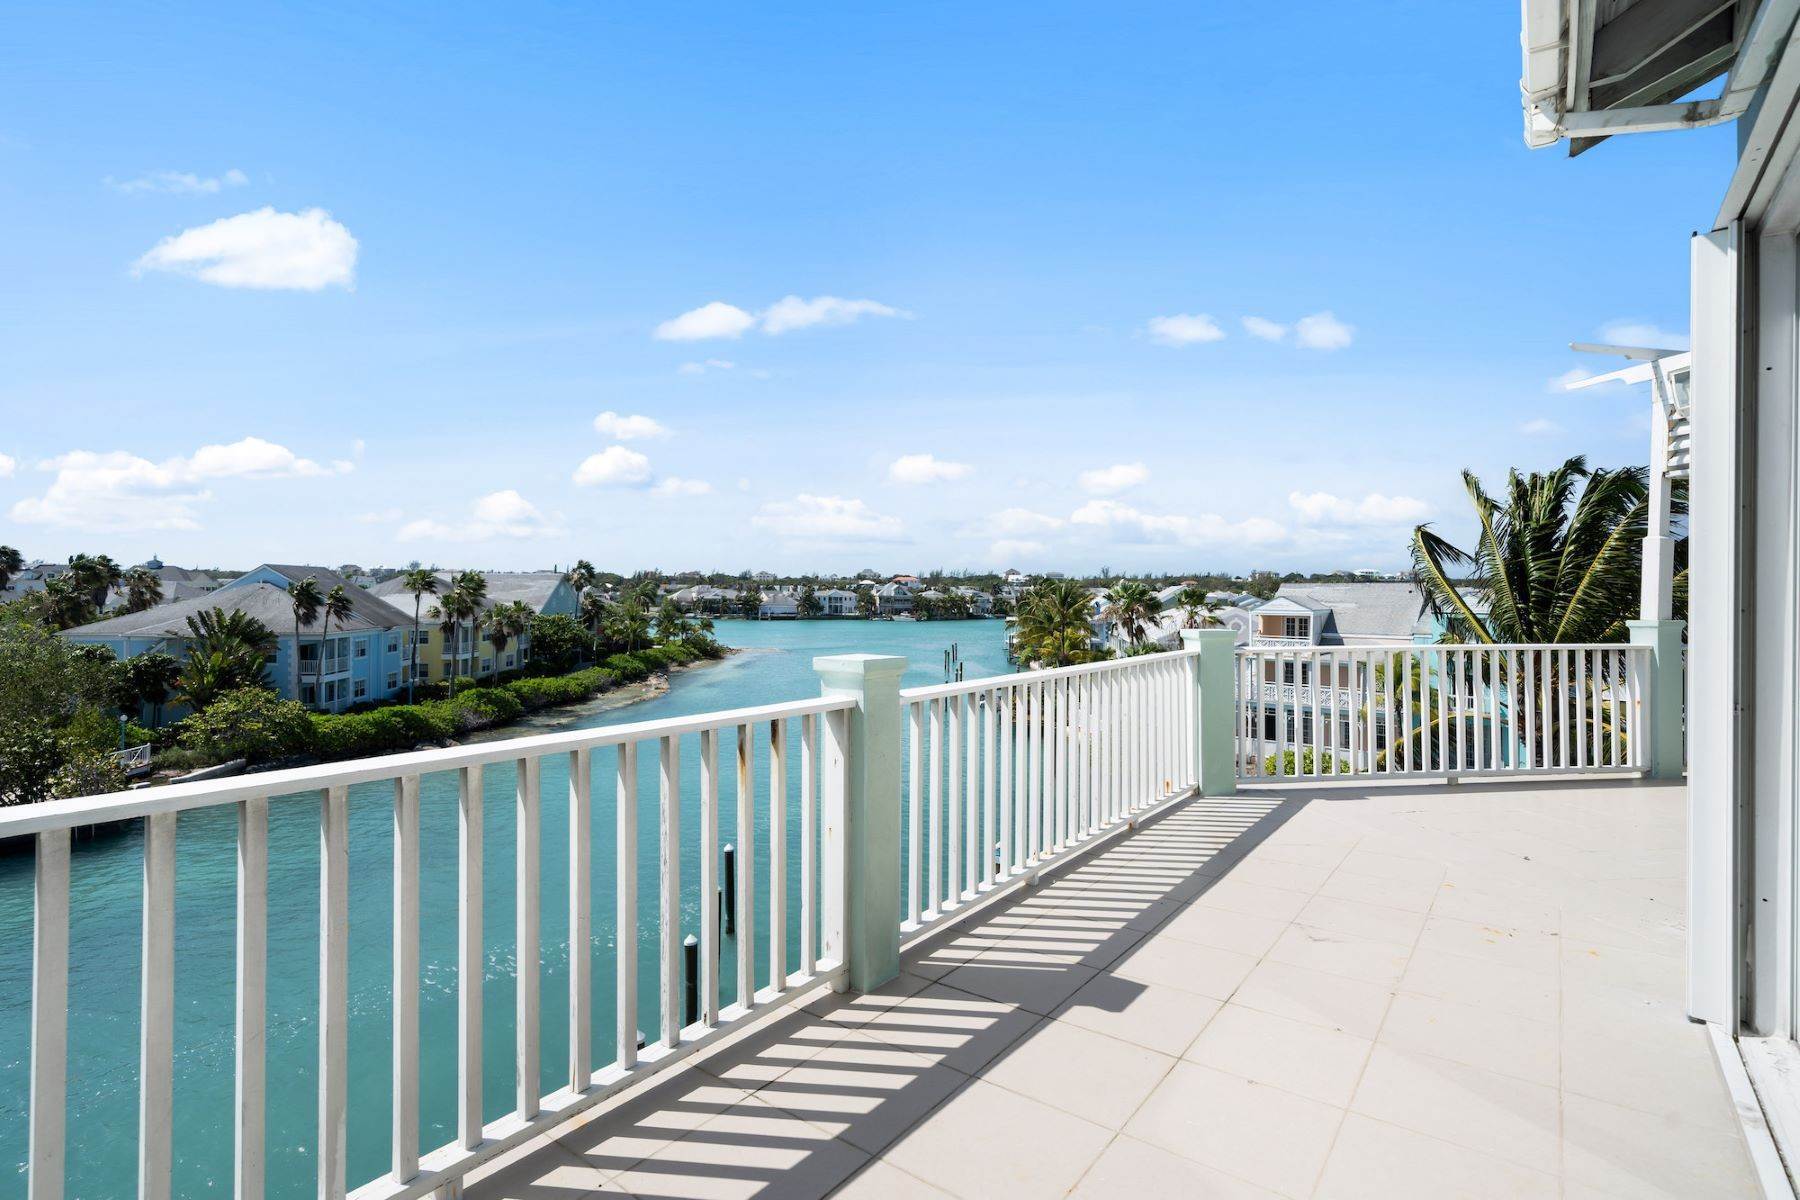 Condominiums for Sale at Sandyport, Cable Beach, Nassau and Paradise Island Bahamas